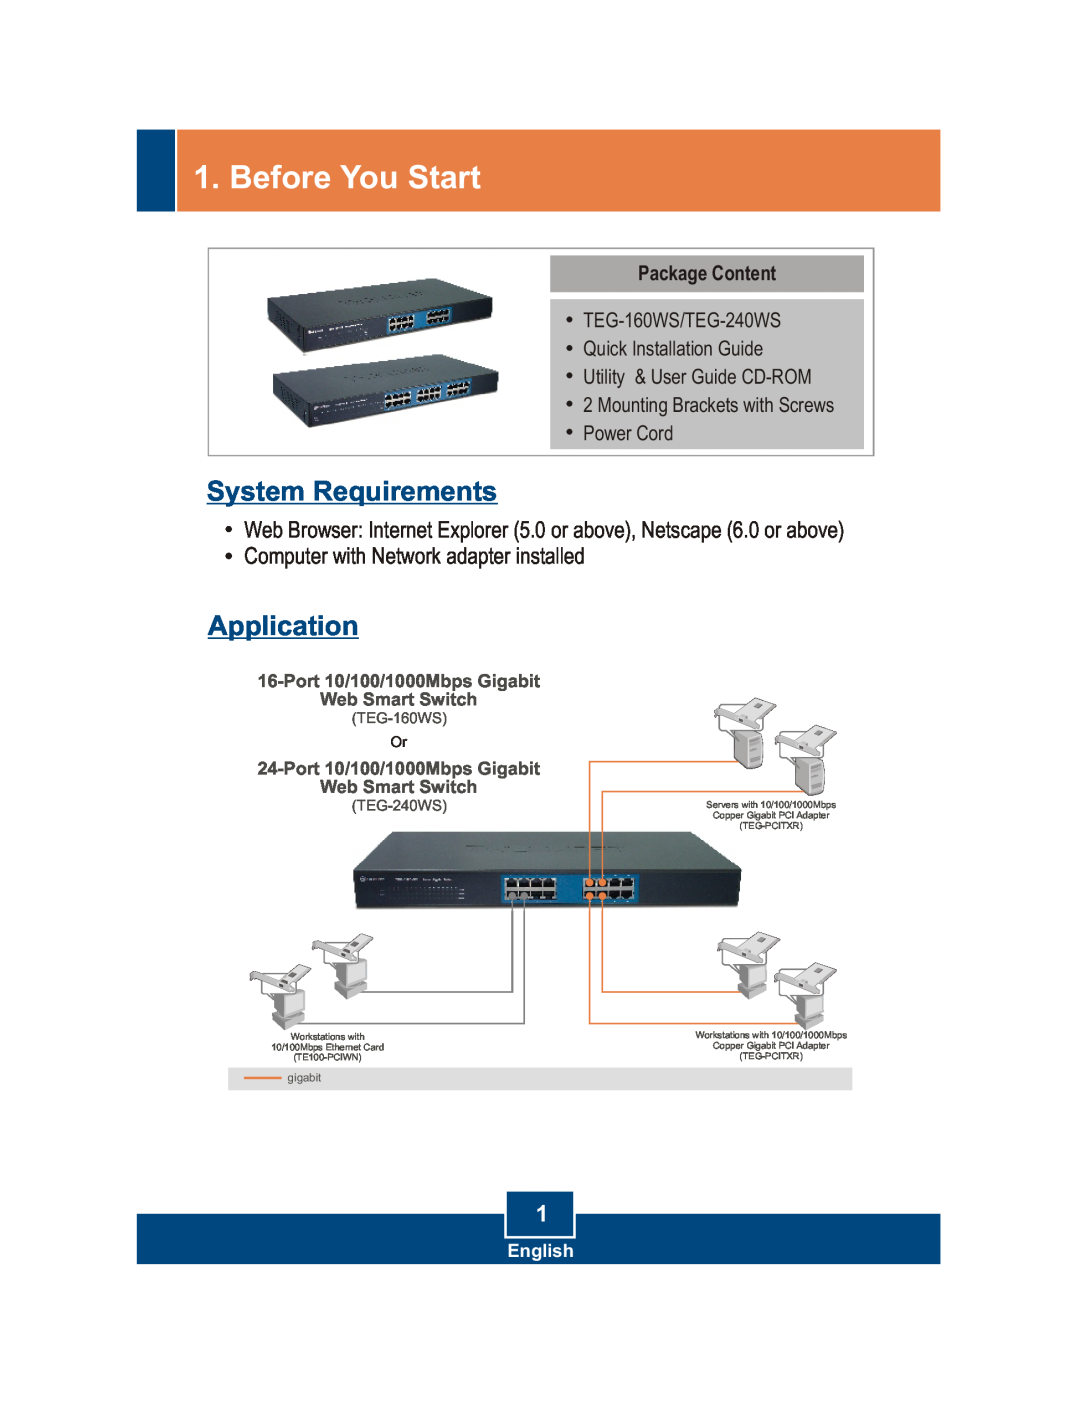 TRENDnet TEG-240WS manual Before You Start, System Requirements, Application, Package Content, English, TEG-160WS, gigabit 